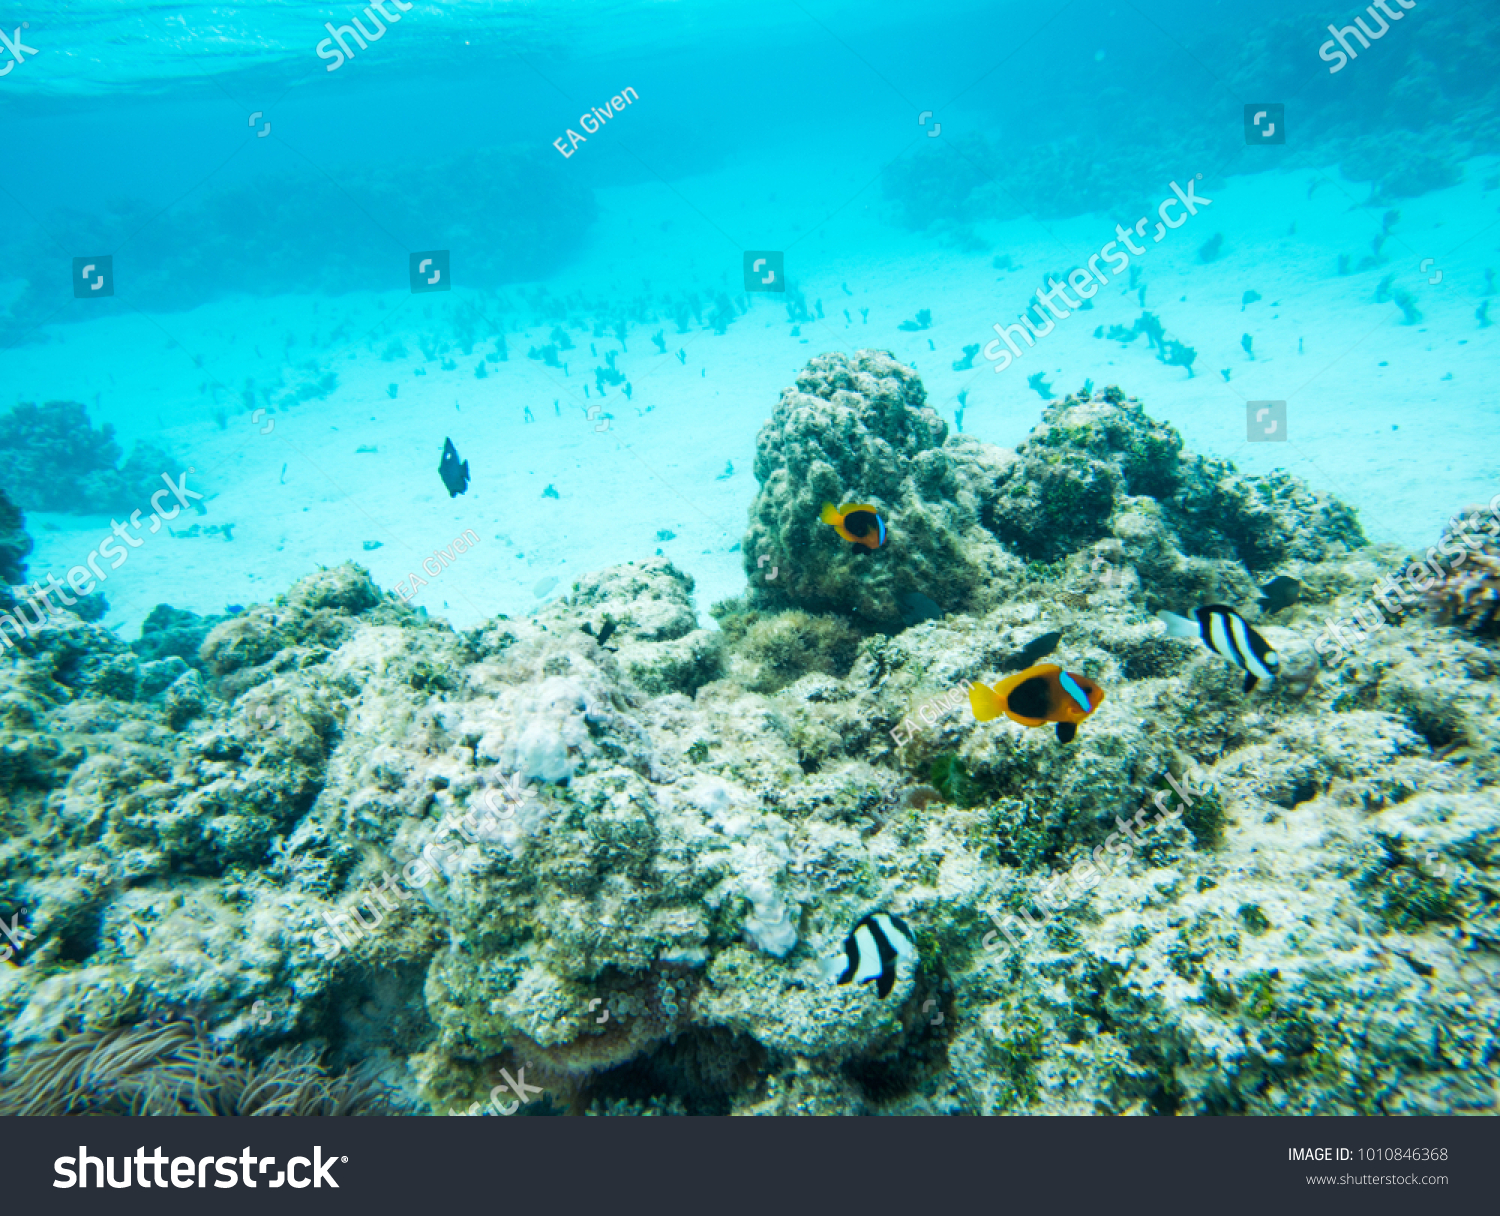 Damselfish, clown fish and surgeonfish swimming in the stunning coral reef in the Pacific Ocean off the coast of Yejele Beach in Tadine, Mare, New Caledonia #1010846368